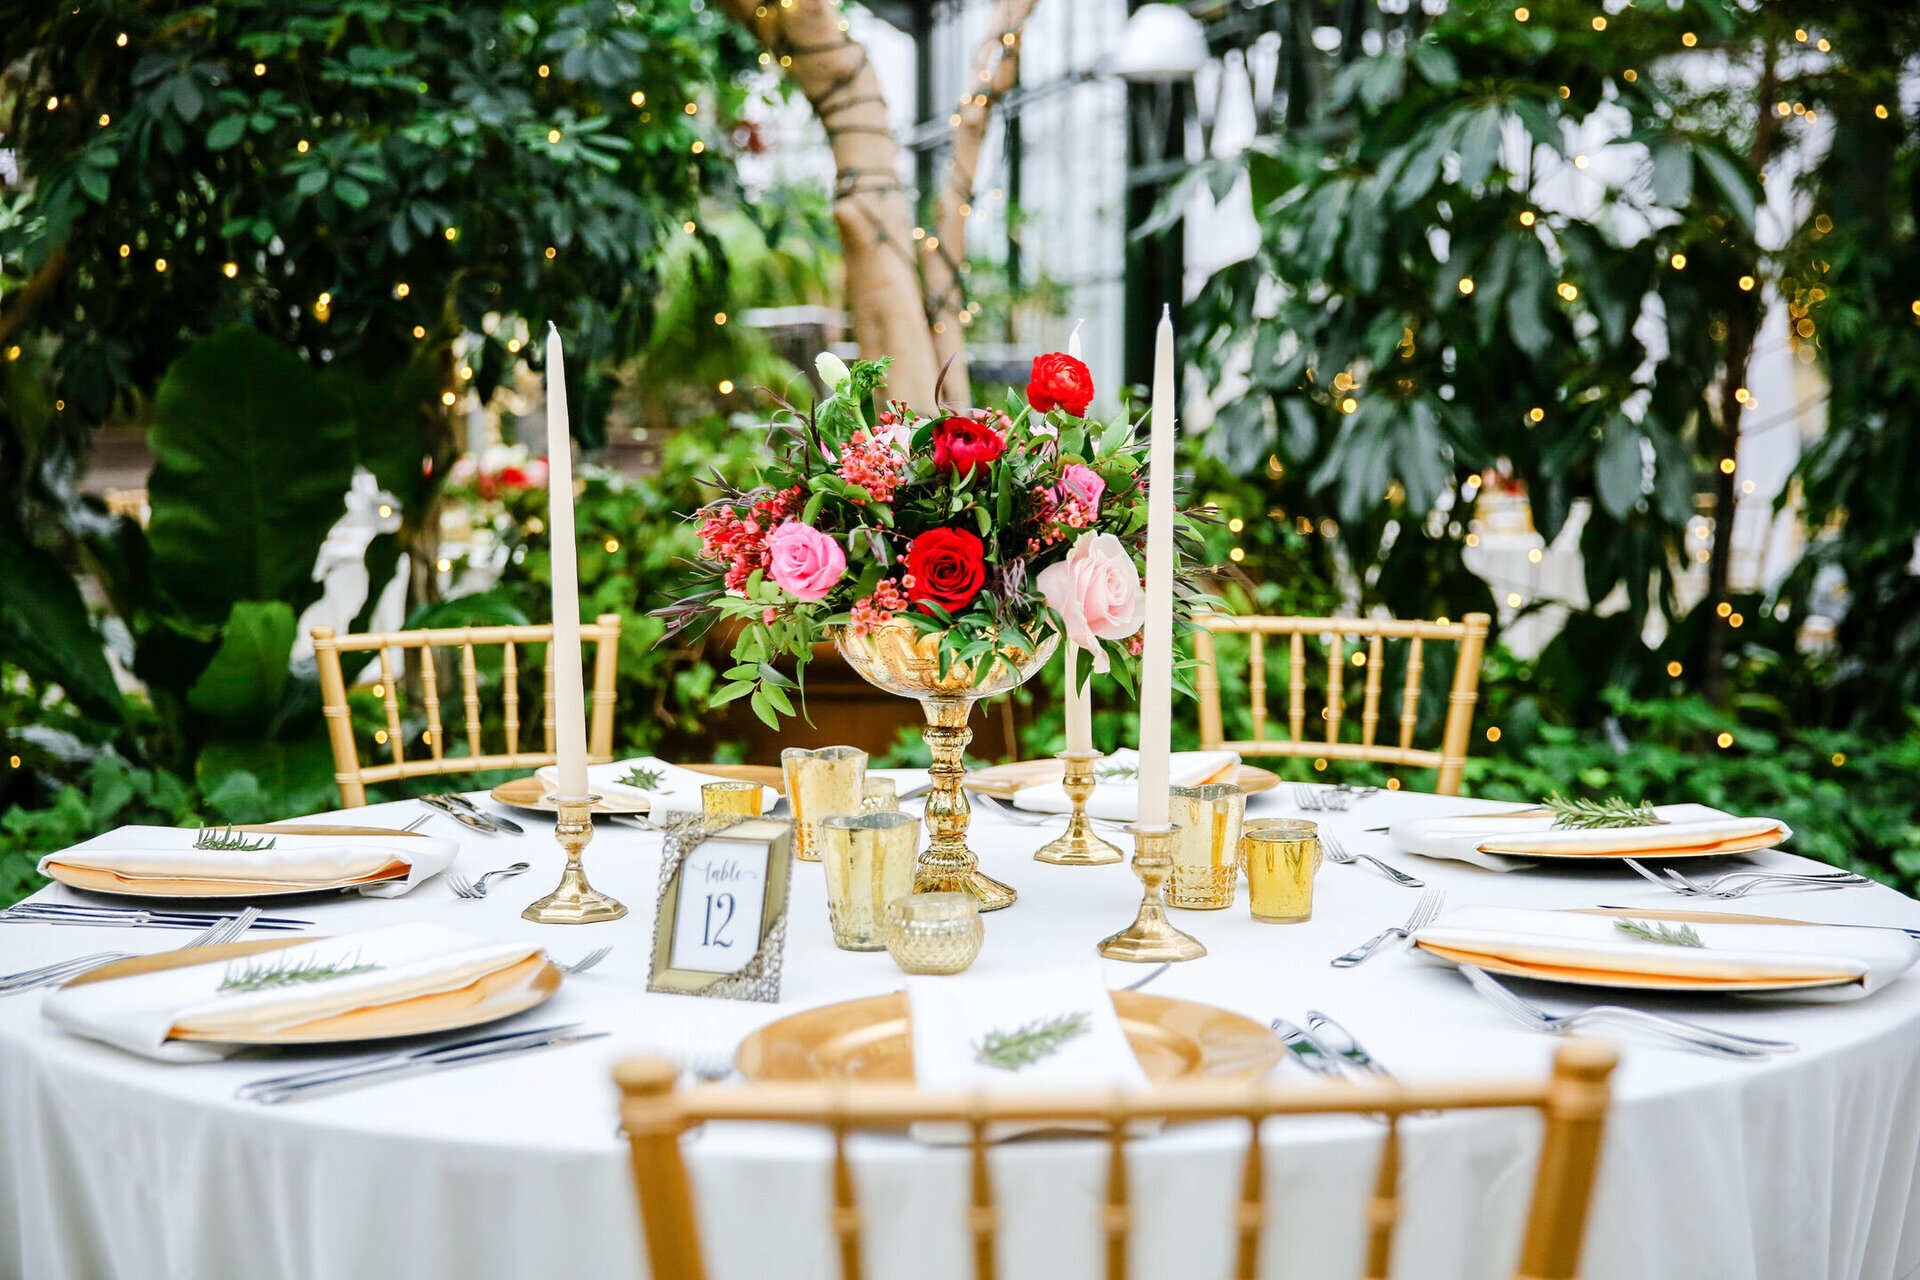 How To Set A Table For Buffet Style Wedding